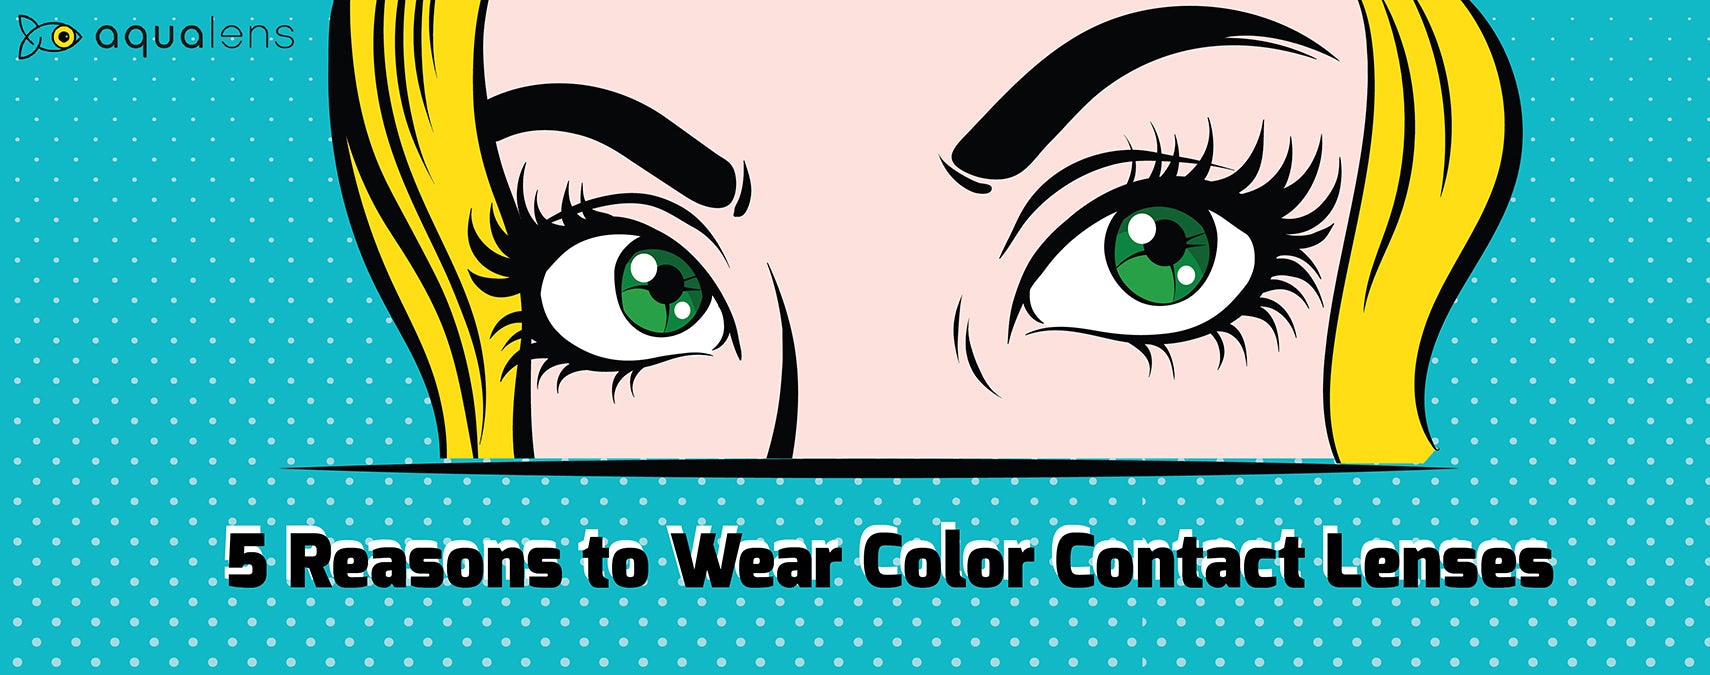 5 Reasons That Will Make You Wanna Try Color Contact Lenses Now!